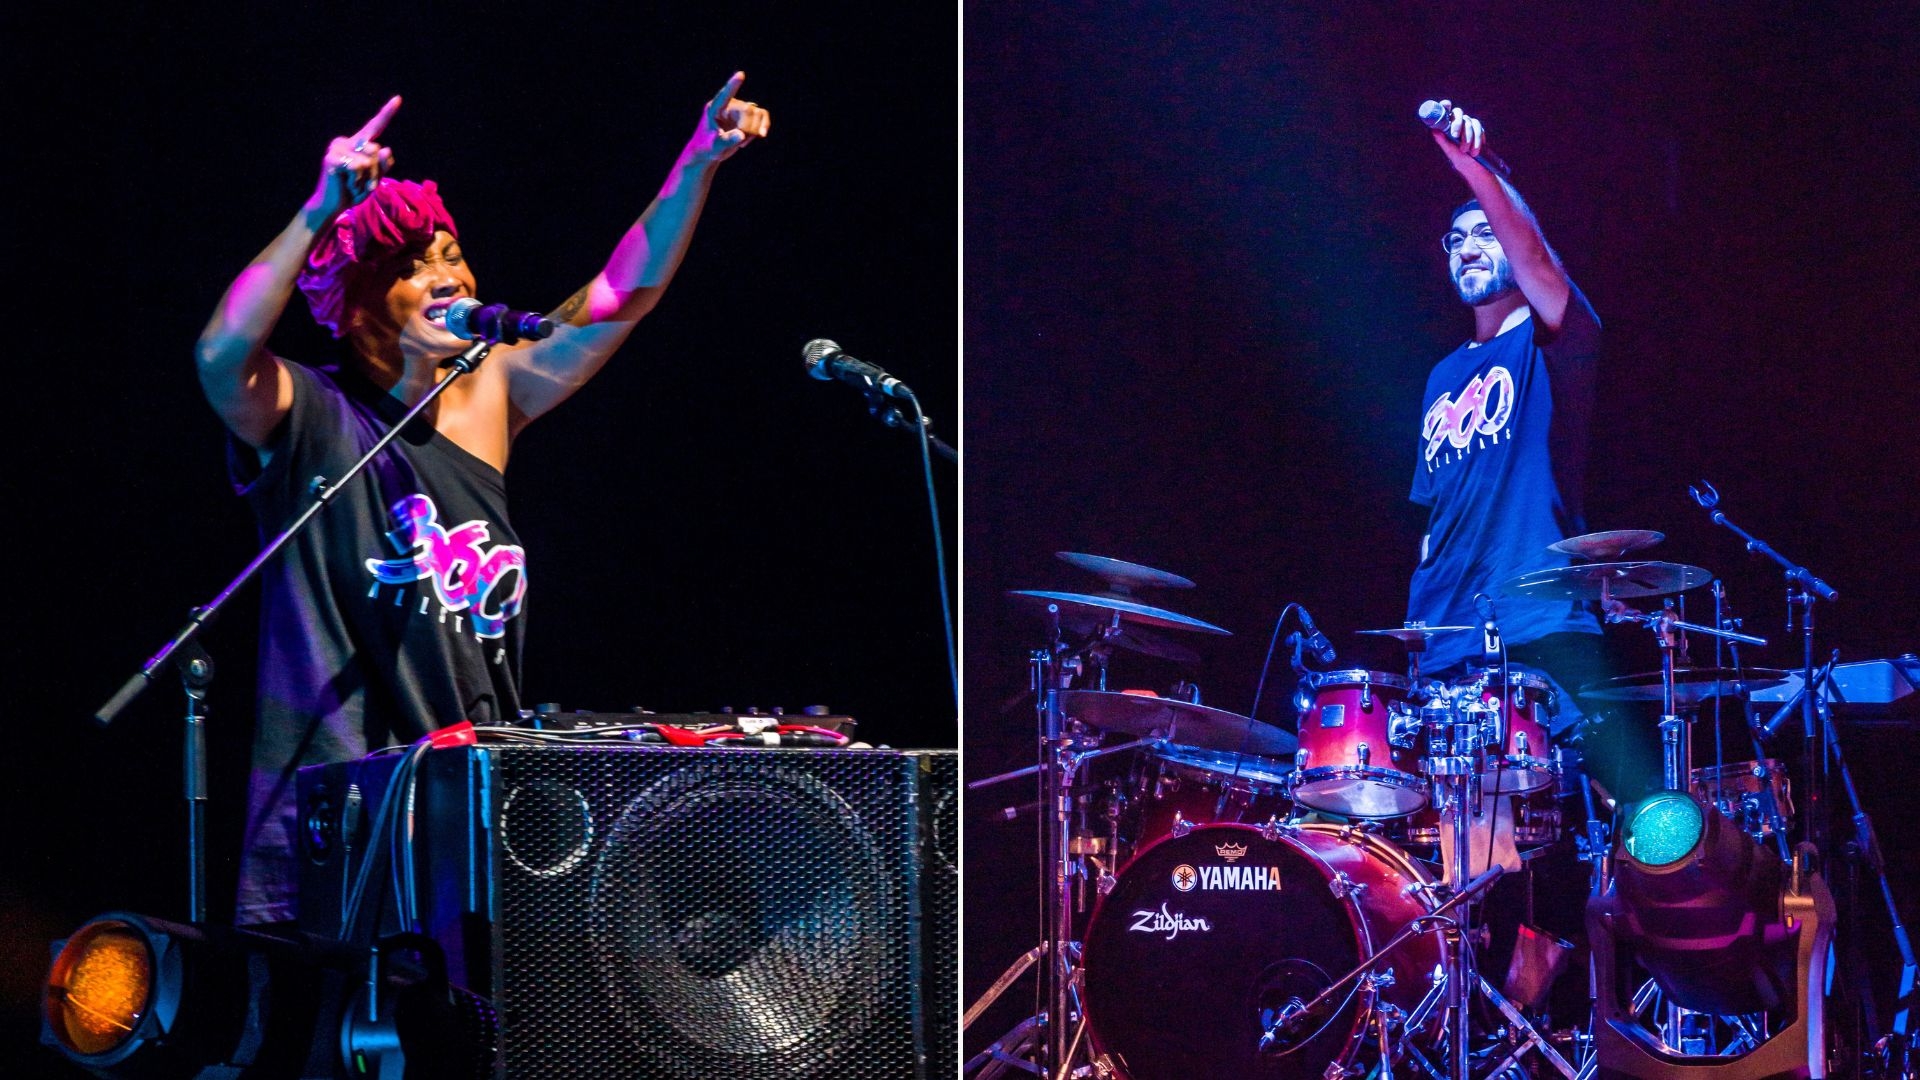 Photos of 2024 cast members Mirrah (left) in front of her DJ booth with her hands up and Gene Peterson (right) standing at his drum kit.